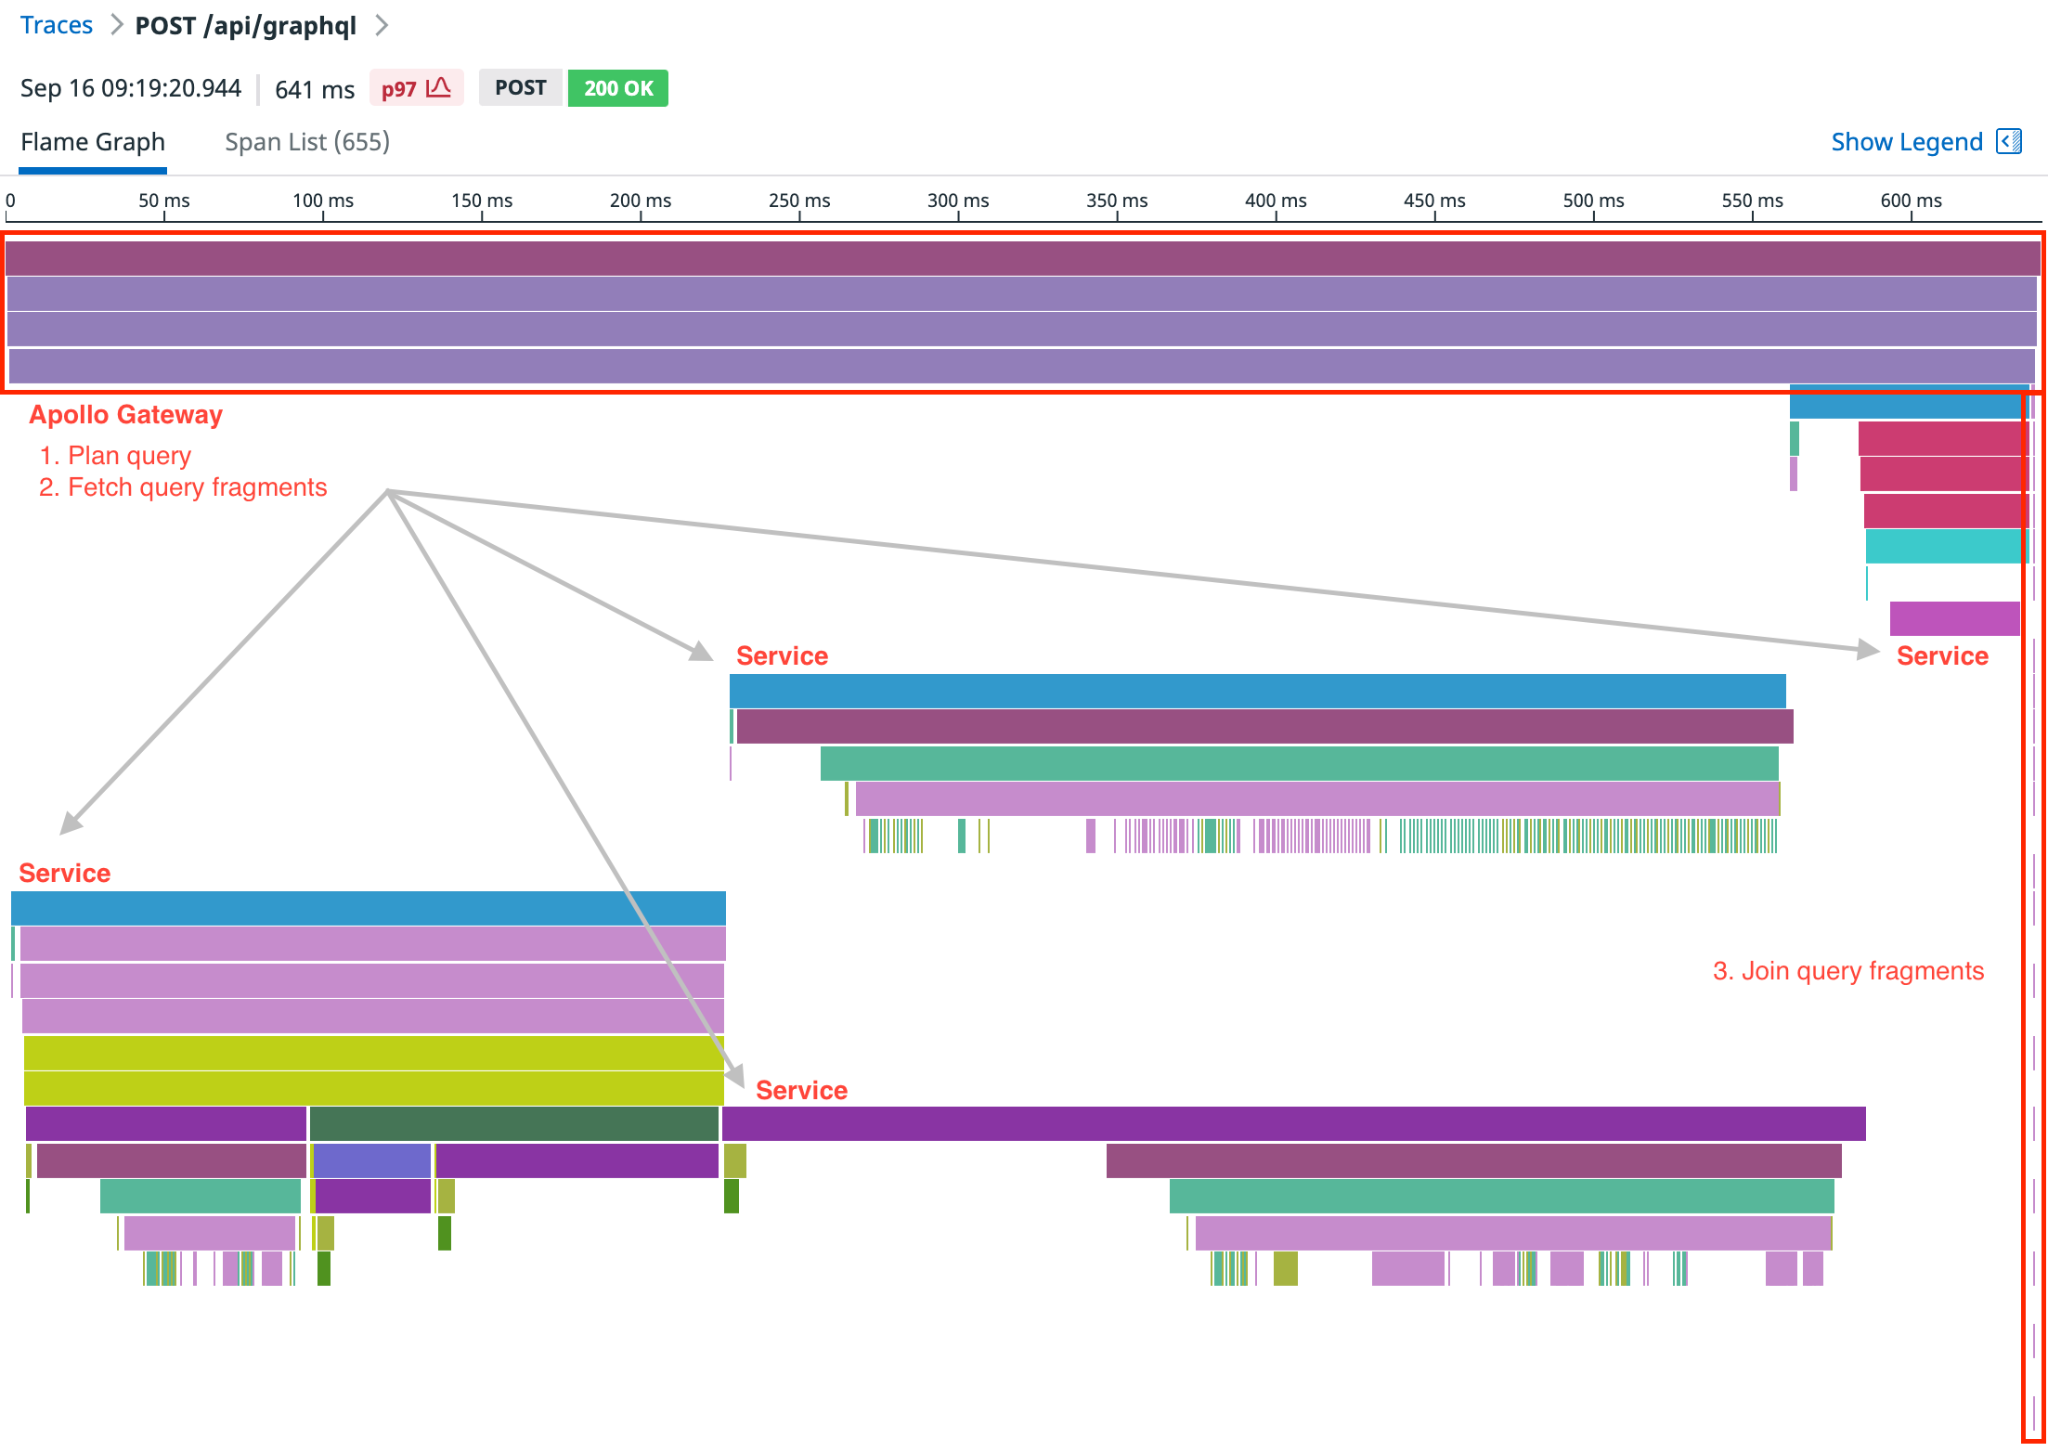 DataDog flamegraph of a federated query execution (Skillshare blogpost)